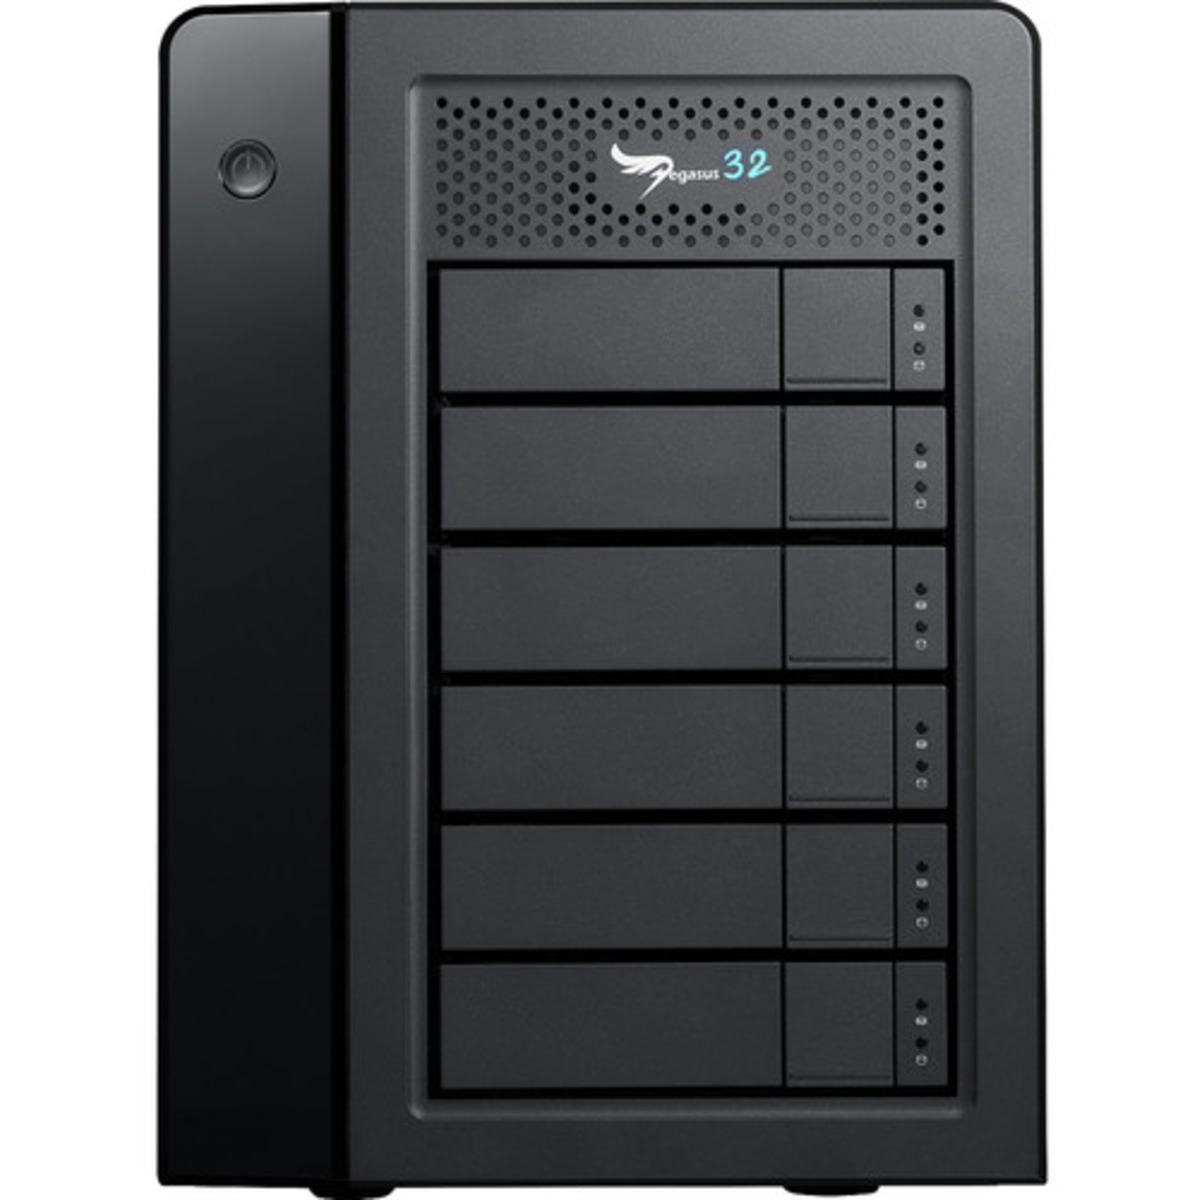 Promise Technology Pegasus32 R6 Thunderbolt 3 80tb 6-Bay Desktop Multimedia / Power User / Business DAS - Direct Attached Storage Device 5x16tb Western Digital Ultrastar DC HC550 WUH721816ALE6L4 3.5 7200rpm SATA 6Gb/s HDD ENTERPRISE Class Drives Installed - Burn-In Tested Pegasus32 R6 Thunderbolt 3